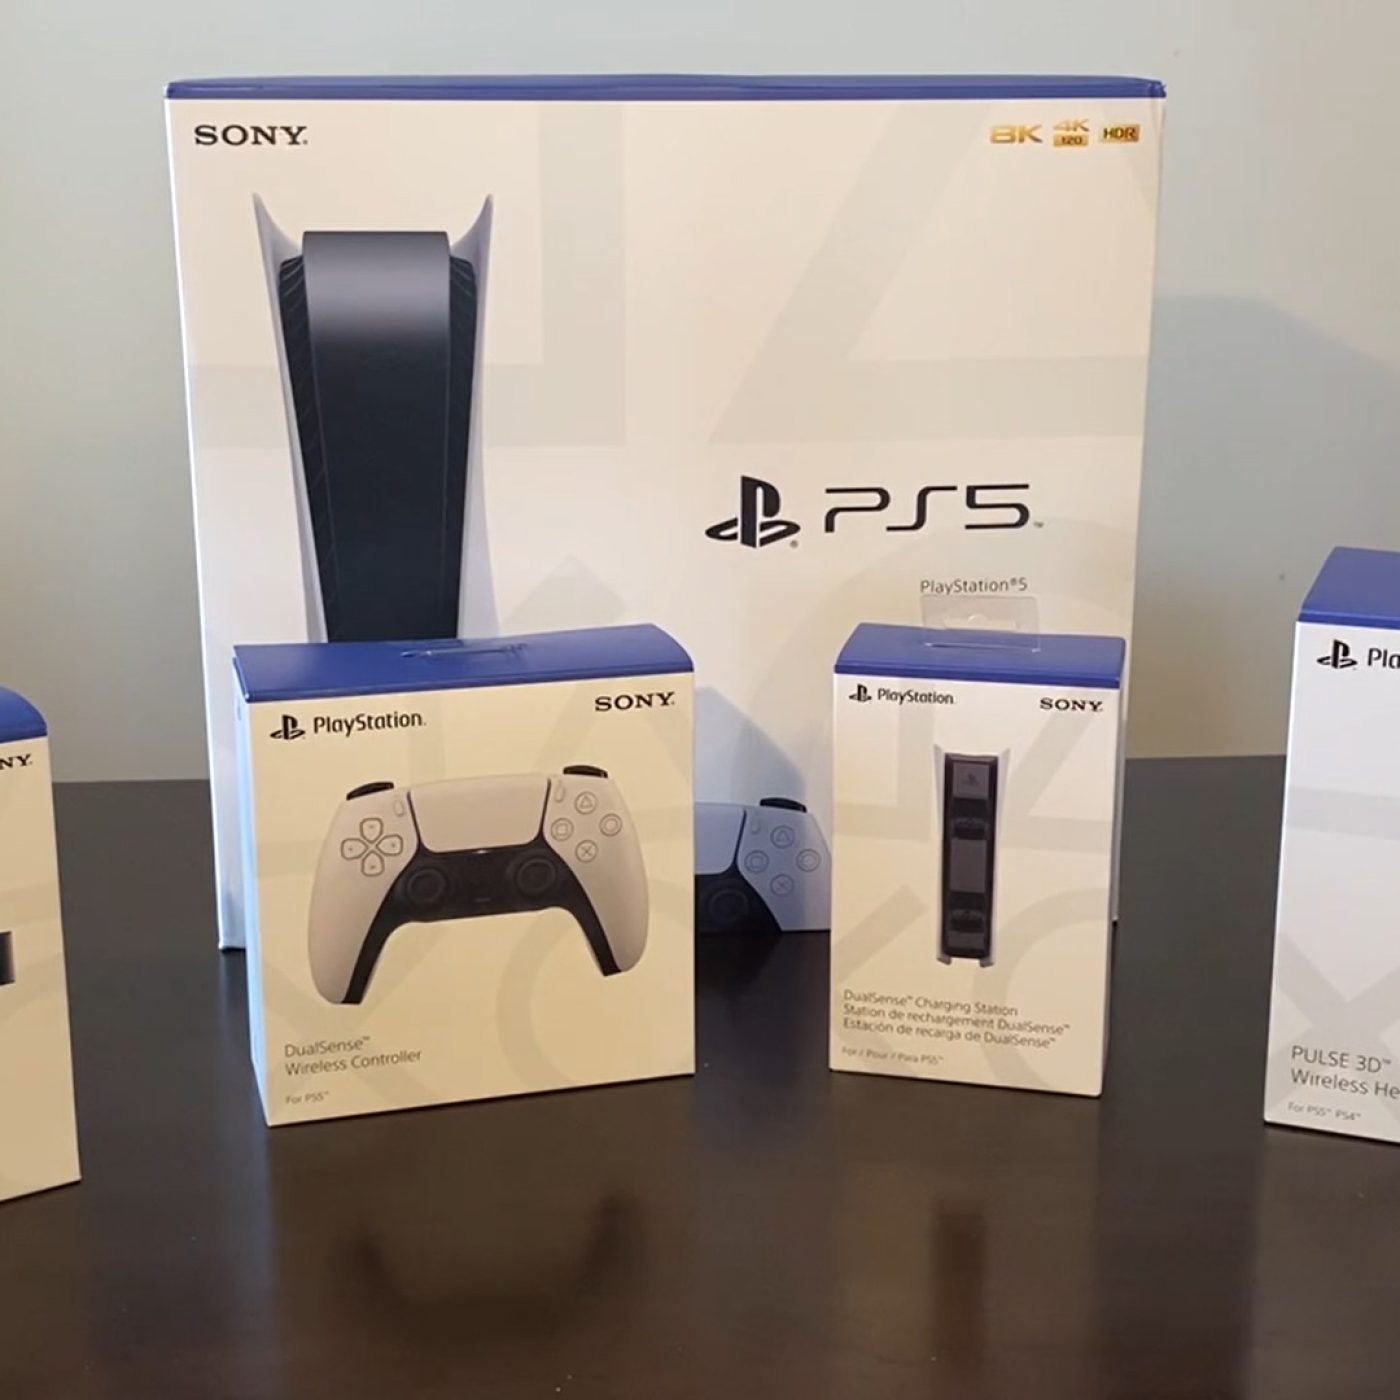 PS5 Digital Edition Unboxing - Sony PlayStation 5 Next Gen Console